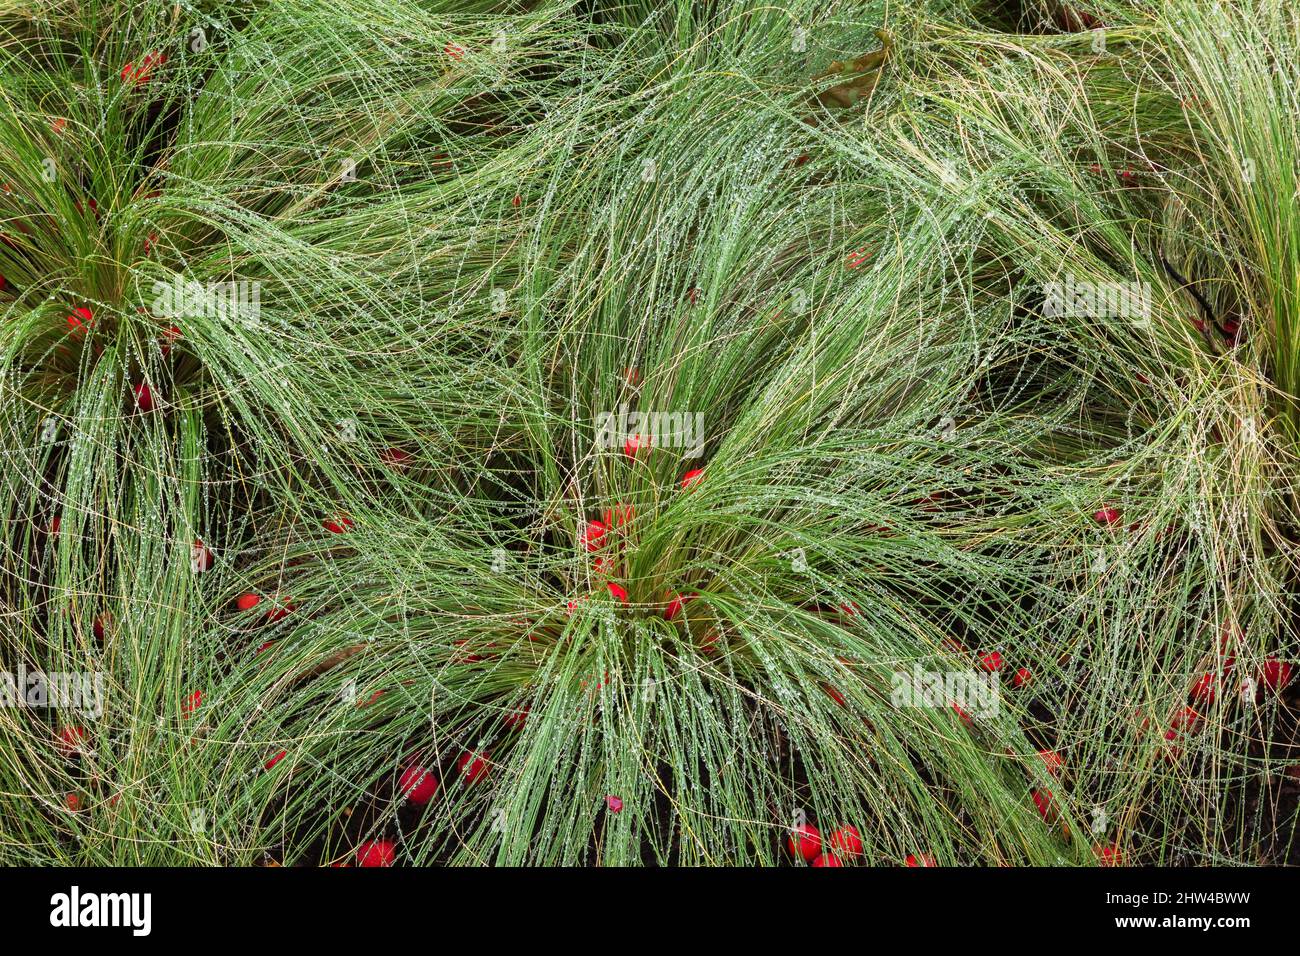 Festuca - Fescue Grass with raindrops and fallen Malus - Crabapples in late summer. Stock Photo